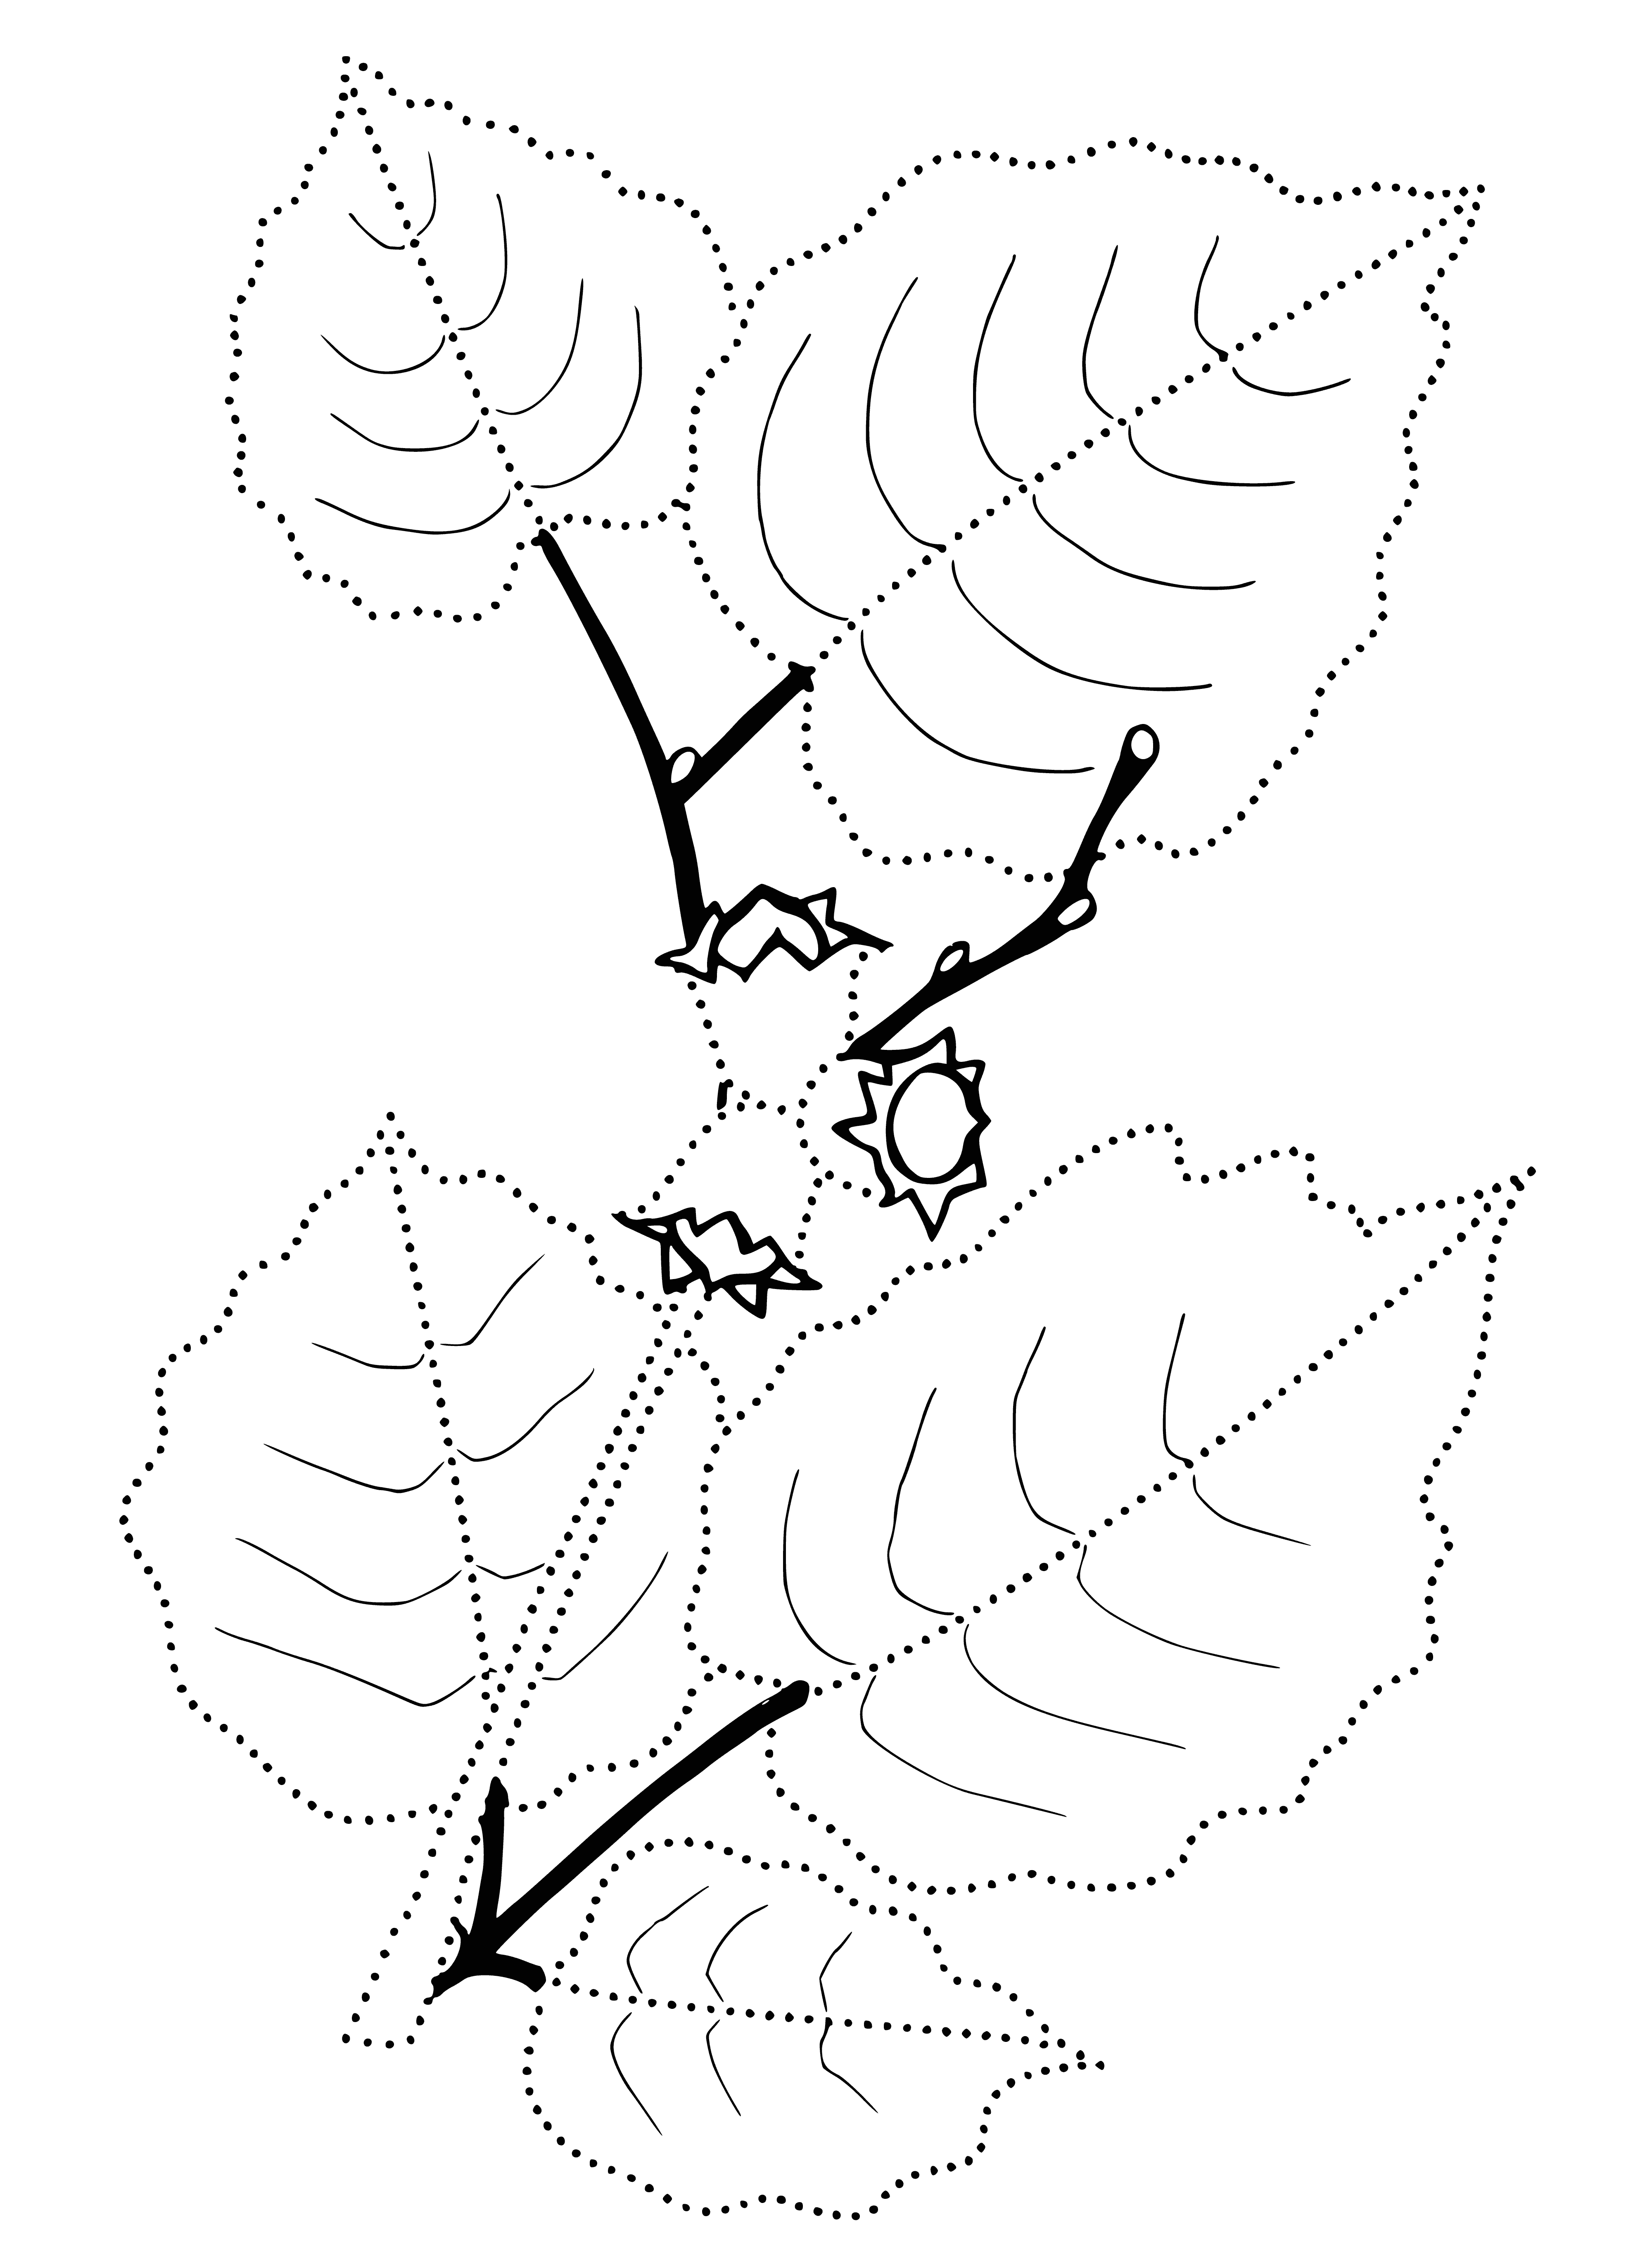 coloring page: Three hazelnuts, two cracked open, one remaining, on a light brown background.